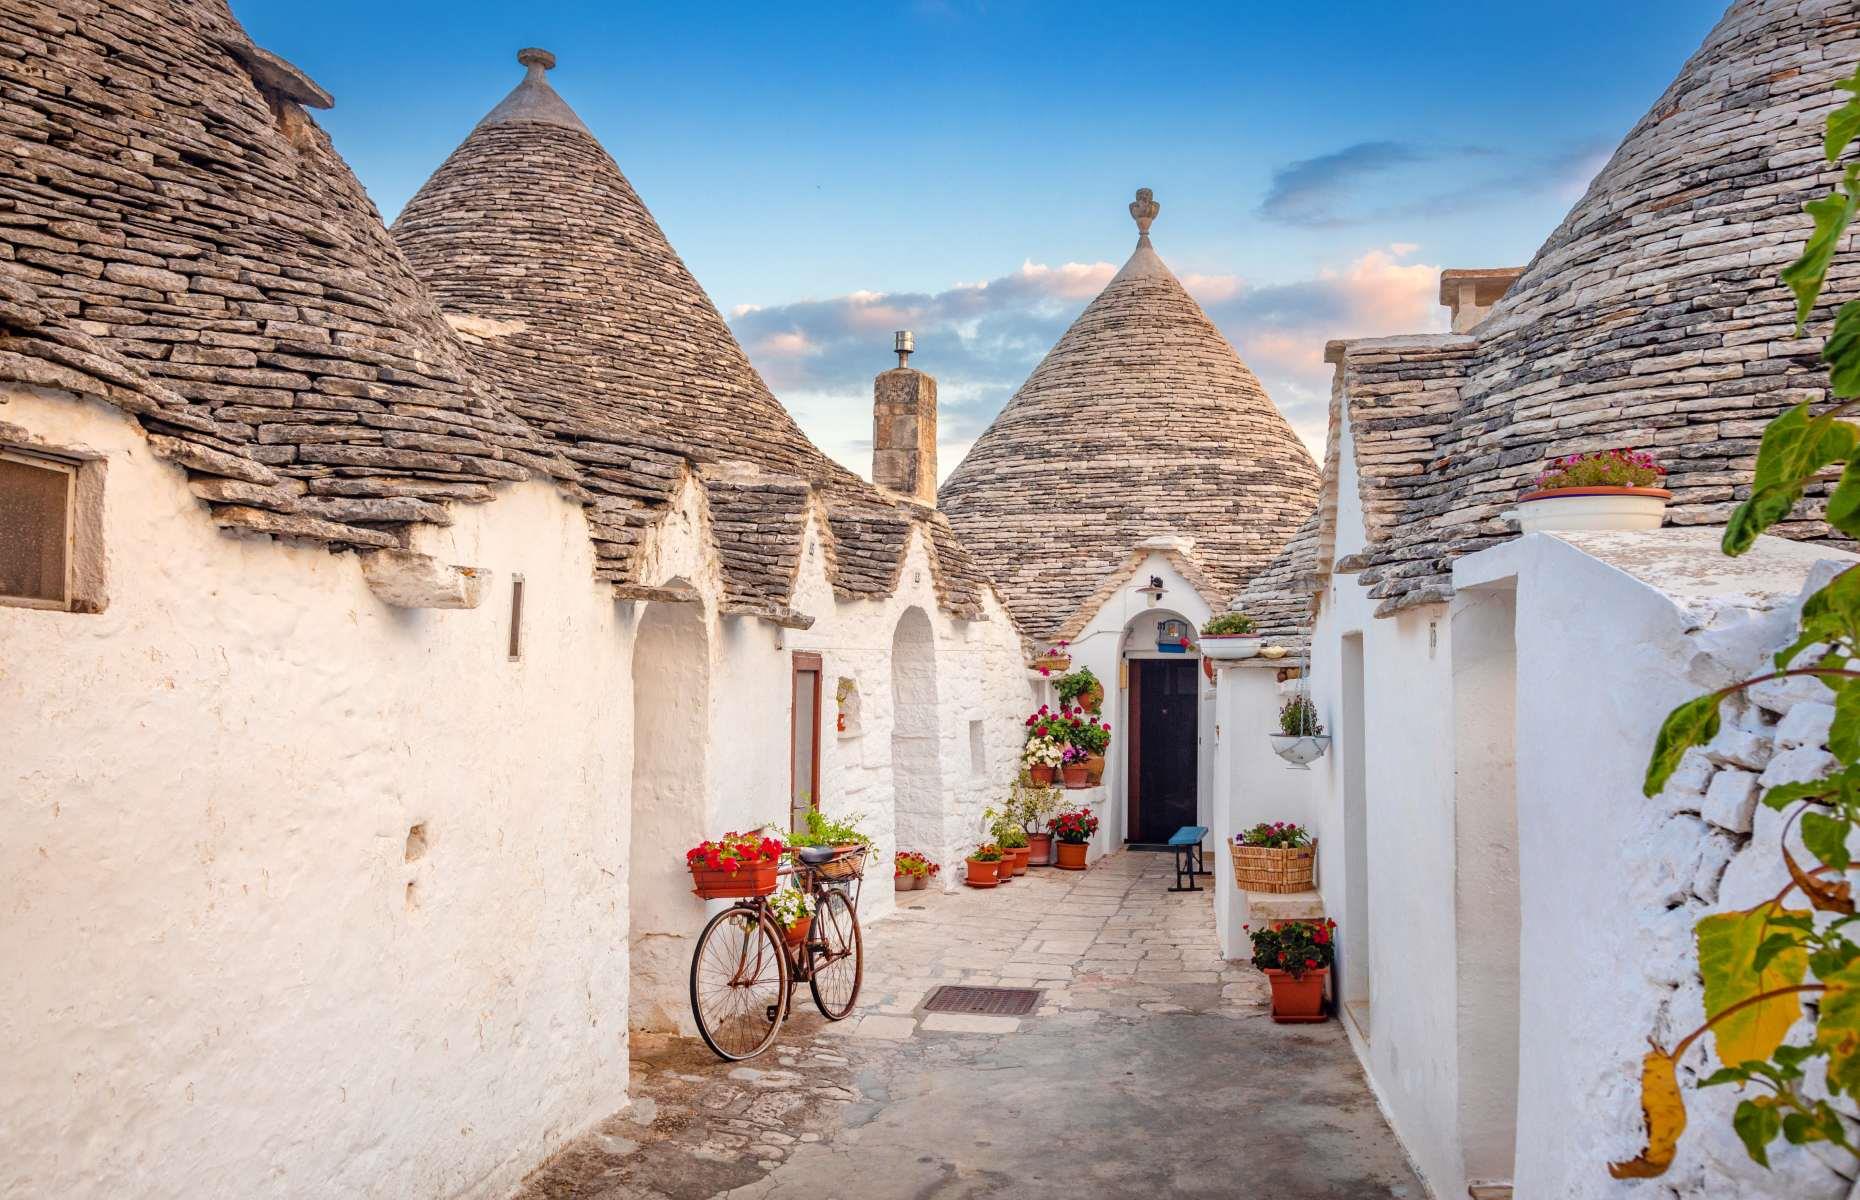 <p>Also in the Valle d’Itria, Alberobello is famous for one thing: its conical limestone trulli dwellings. Inscribed on the UNESCO World Heritage list, which describes them as “remarkable examples of drywall (mortarless) construction, a prehistoric building technique still in use in this region,” trulli have been here since the mid-14th century. The town is touristy but charming, especially early in the morning, and if you head to Rione Aia Piccola – the small yard district – you’ll escape the crowds.</p>